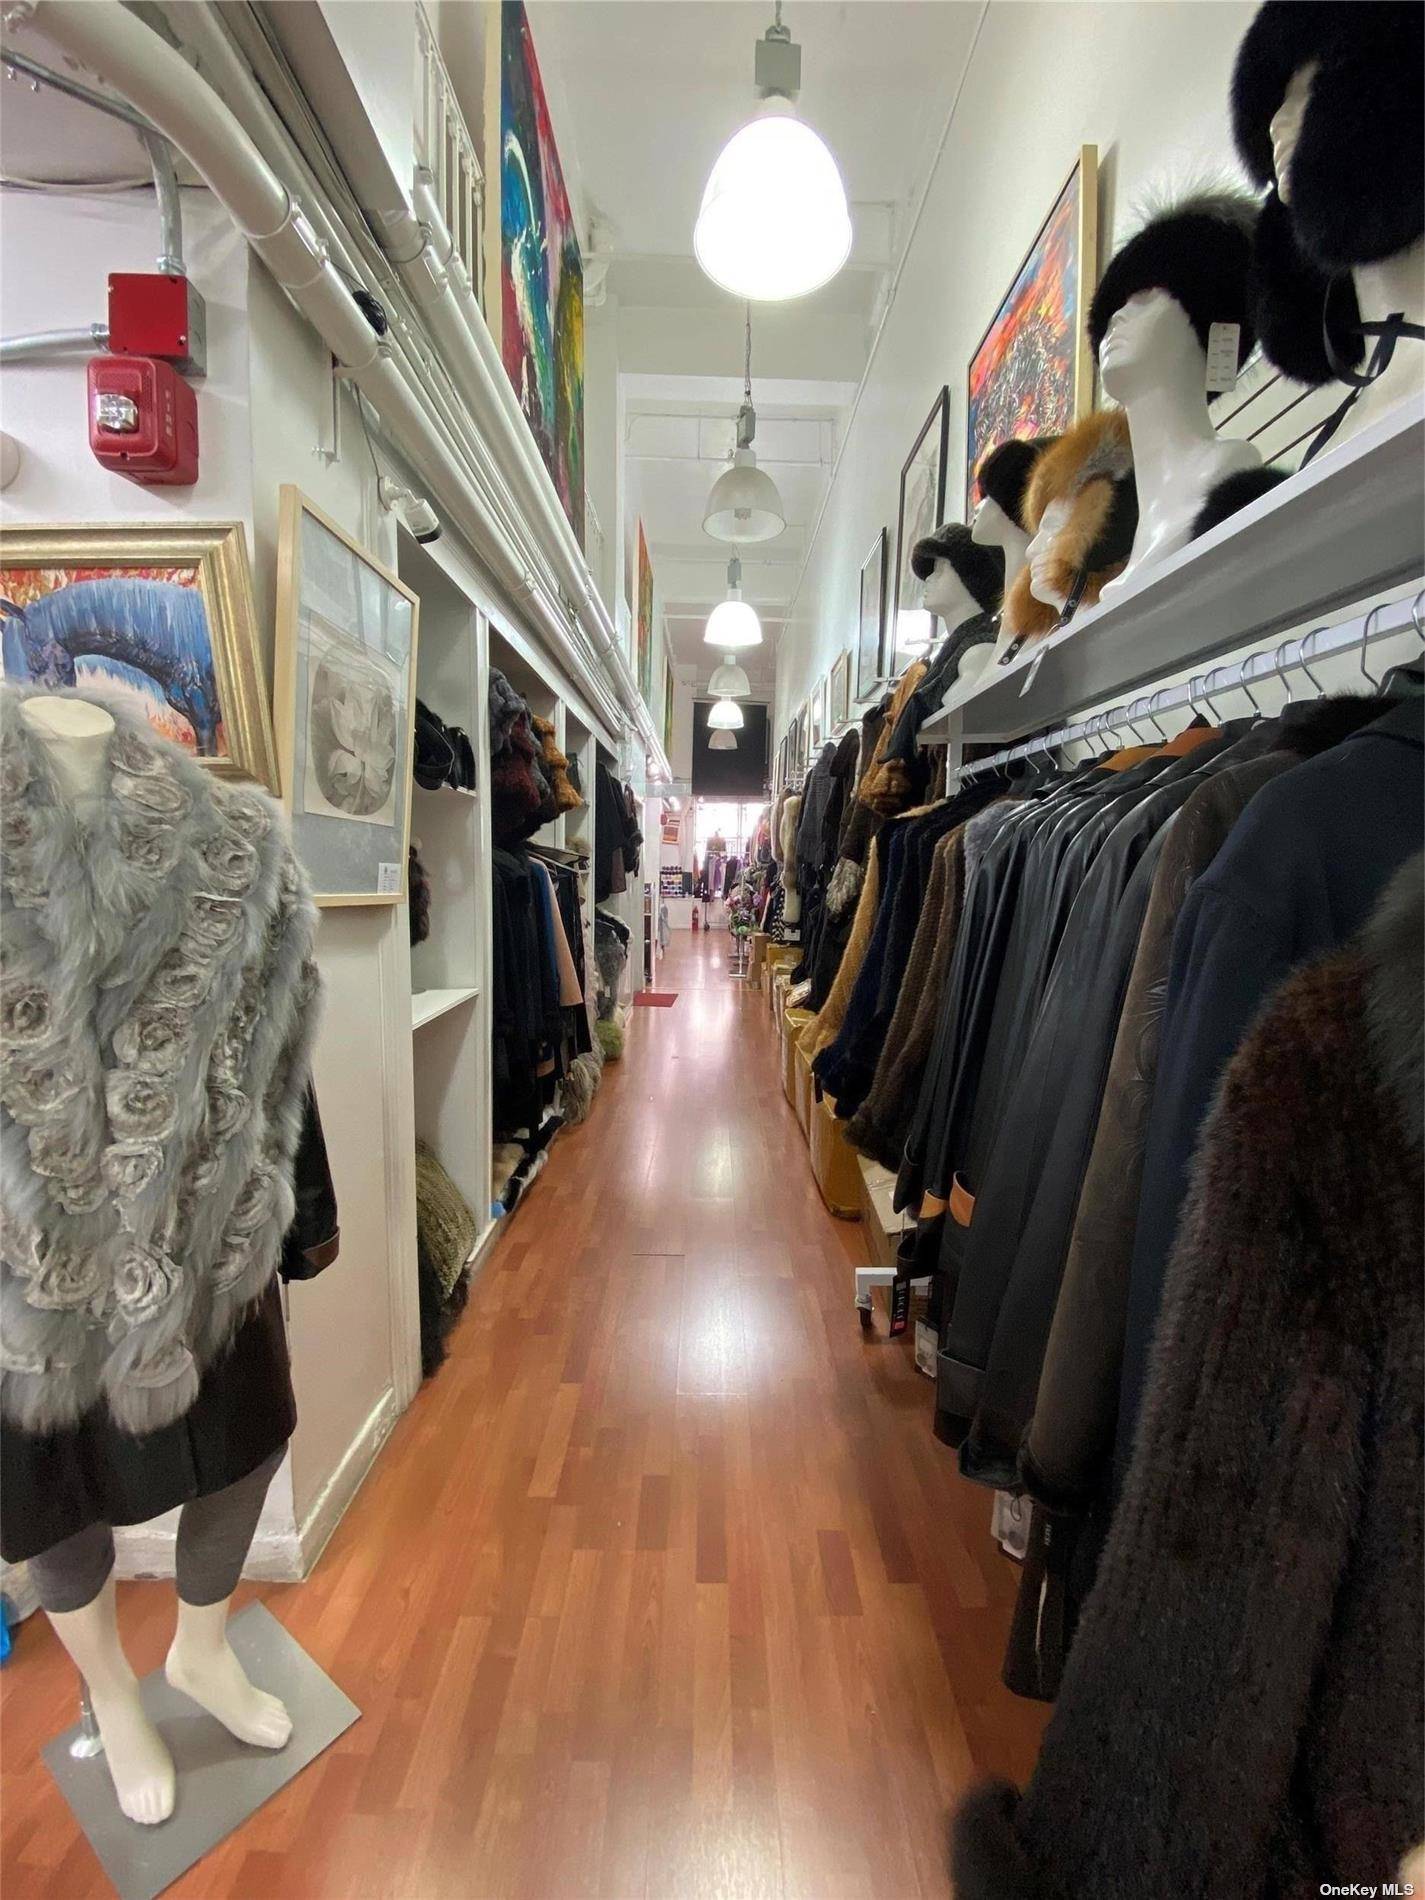 Business sells real fur and leather jackets and coats.